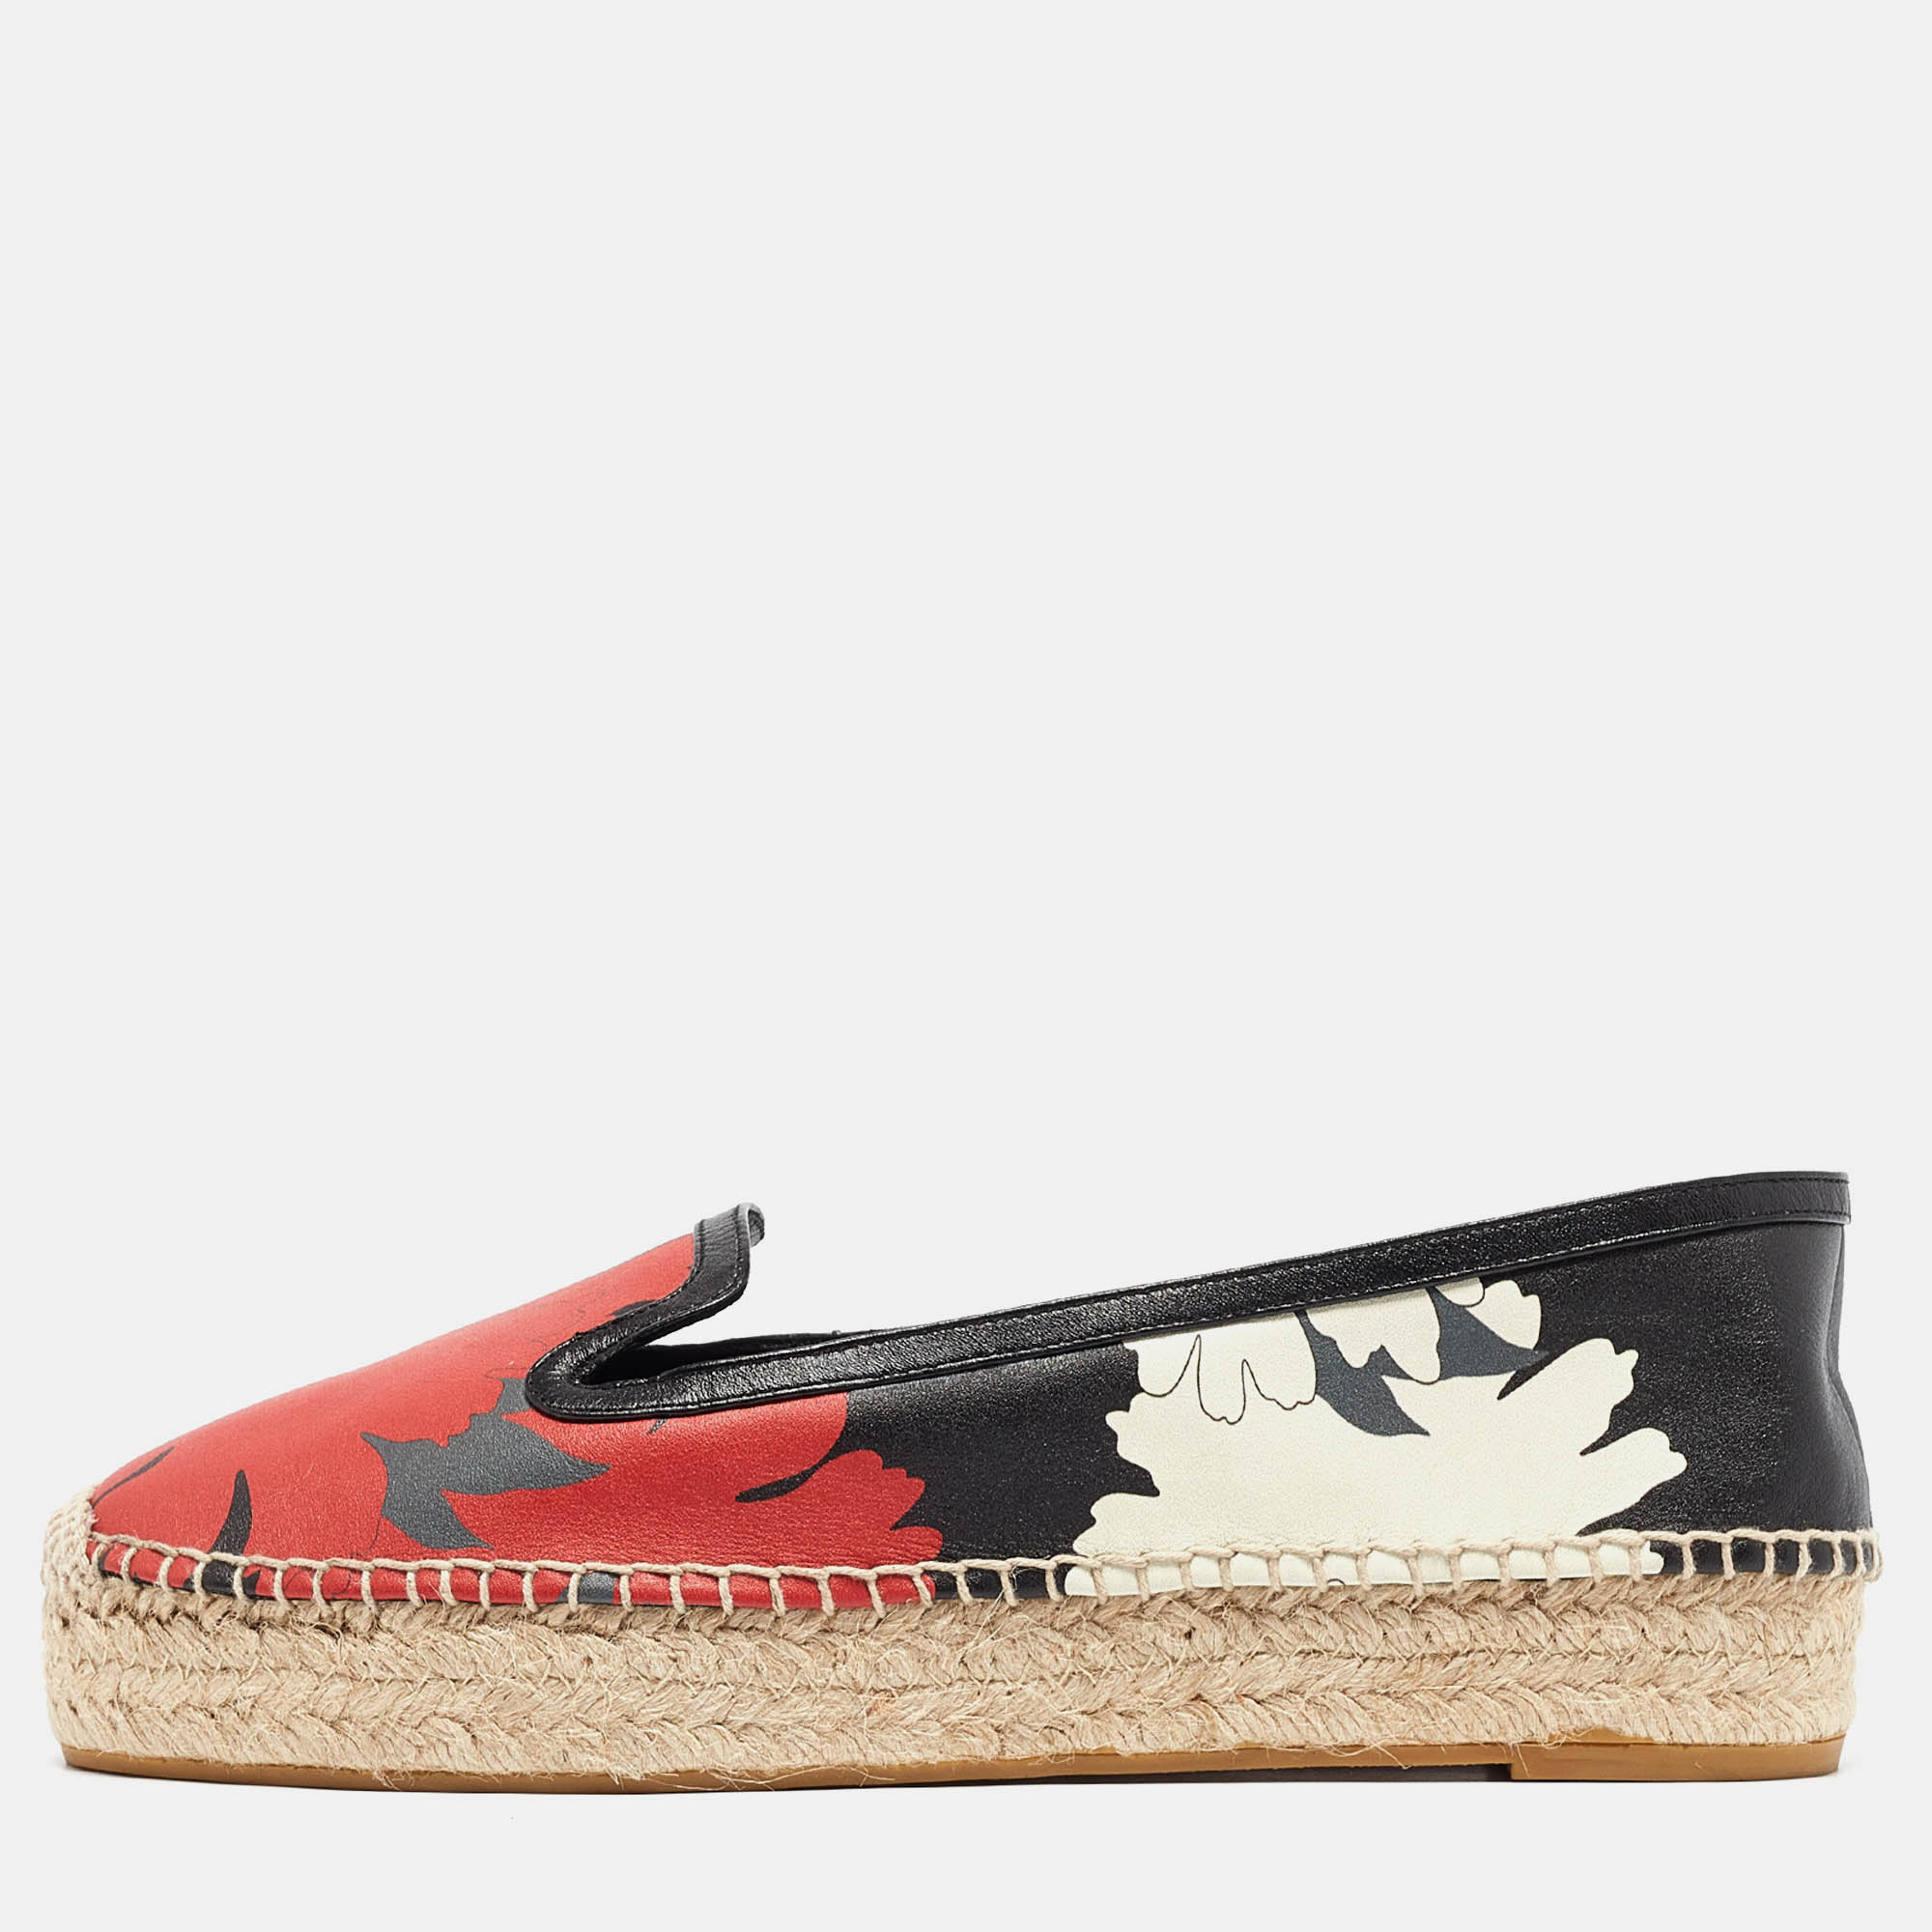 

Alexander McQueen Multicolor Printed Leather Espadrilles Flats Size